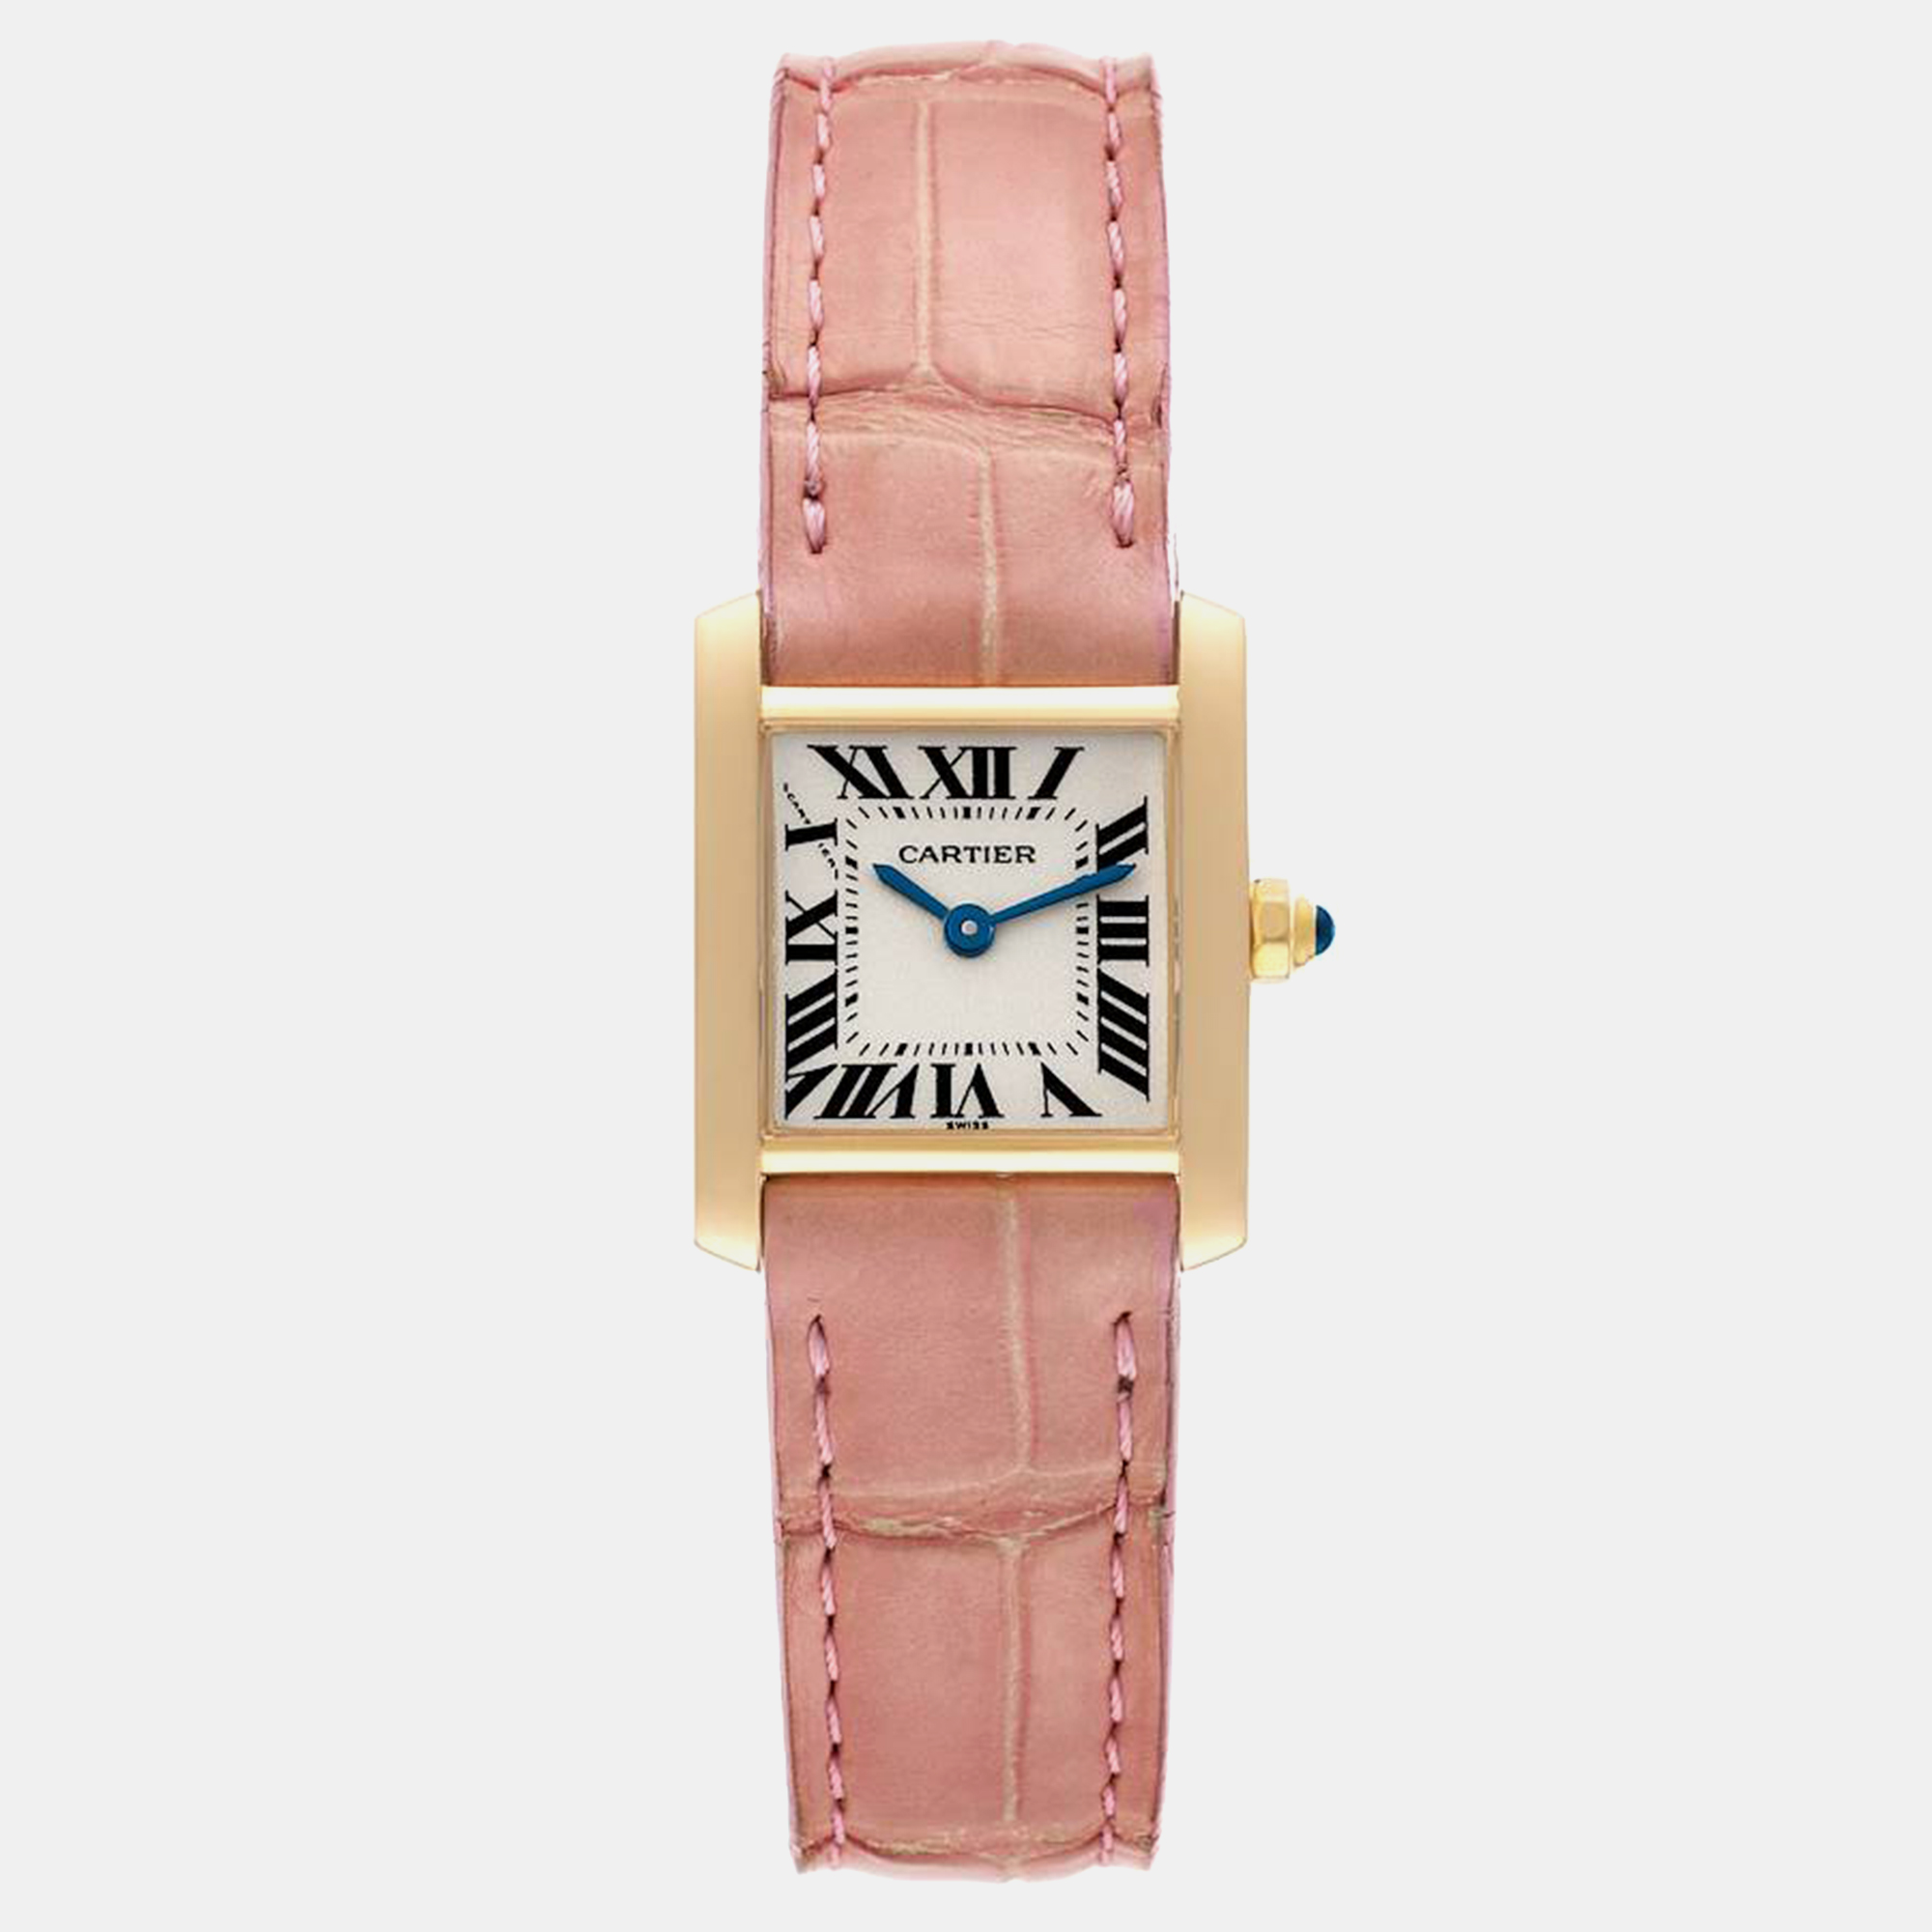 Cartier tank francaise yellow gold pink strap ladies watch w5000256 20 x 25 mm